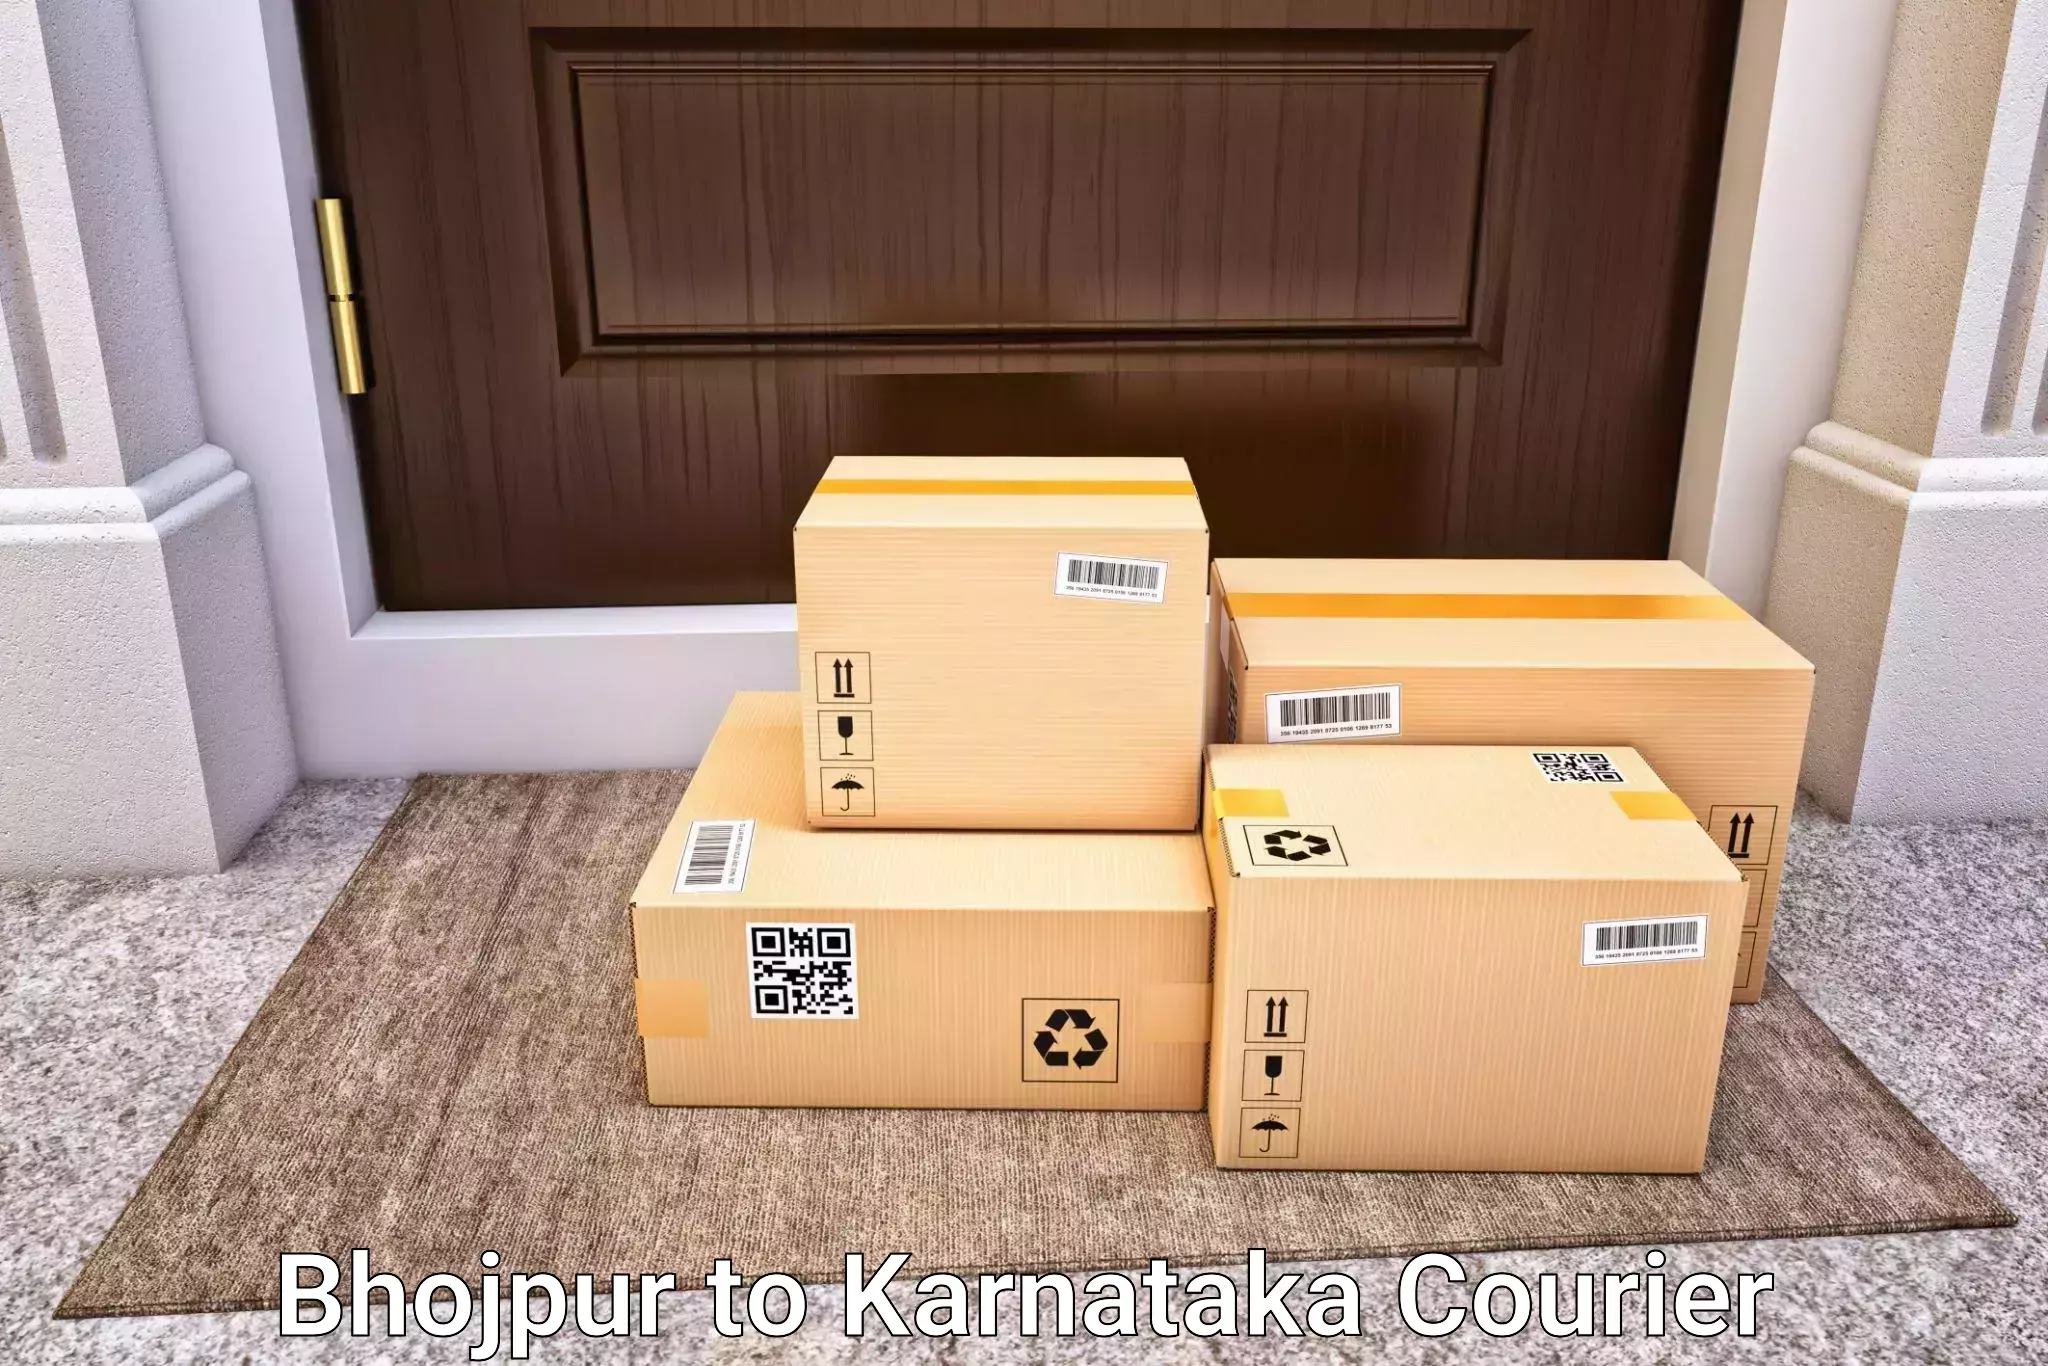 Luggage shipment specialists Bhojpur to Davangere